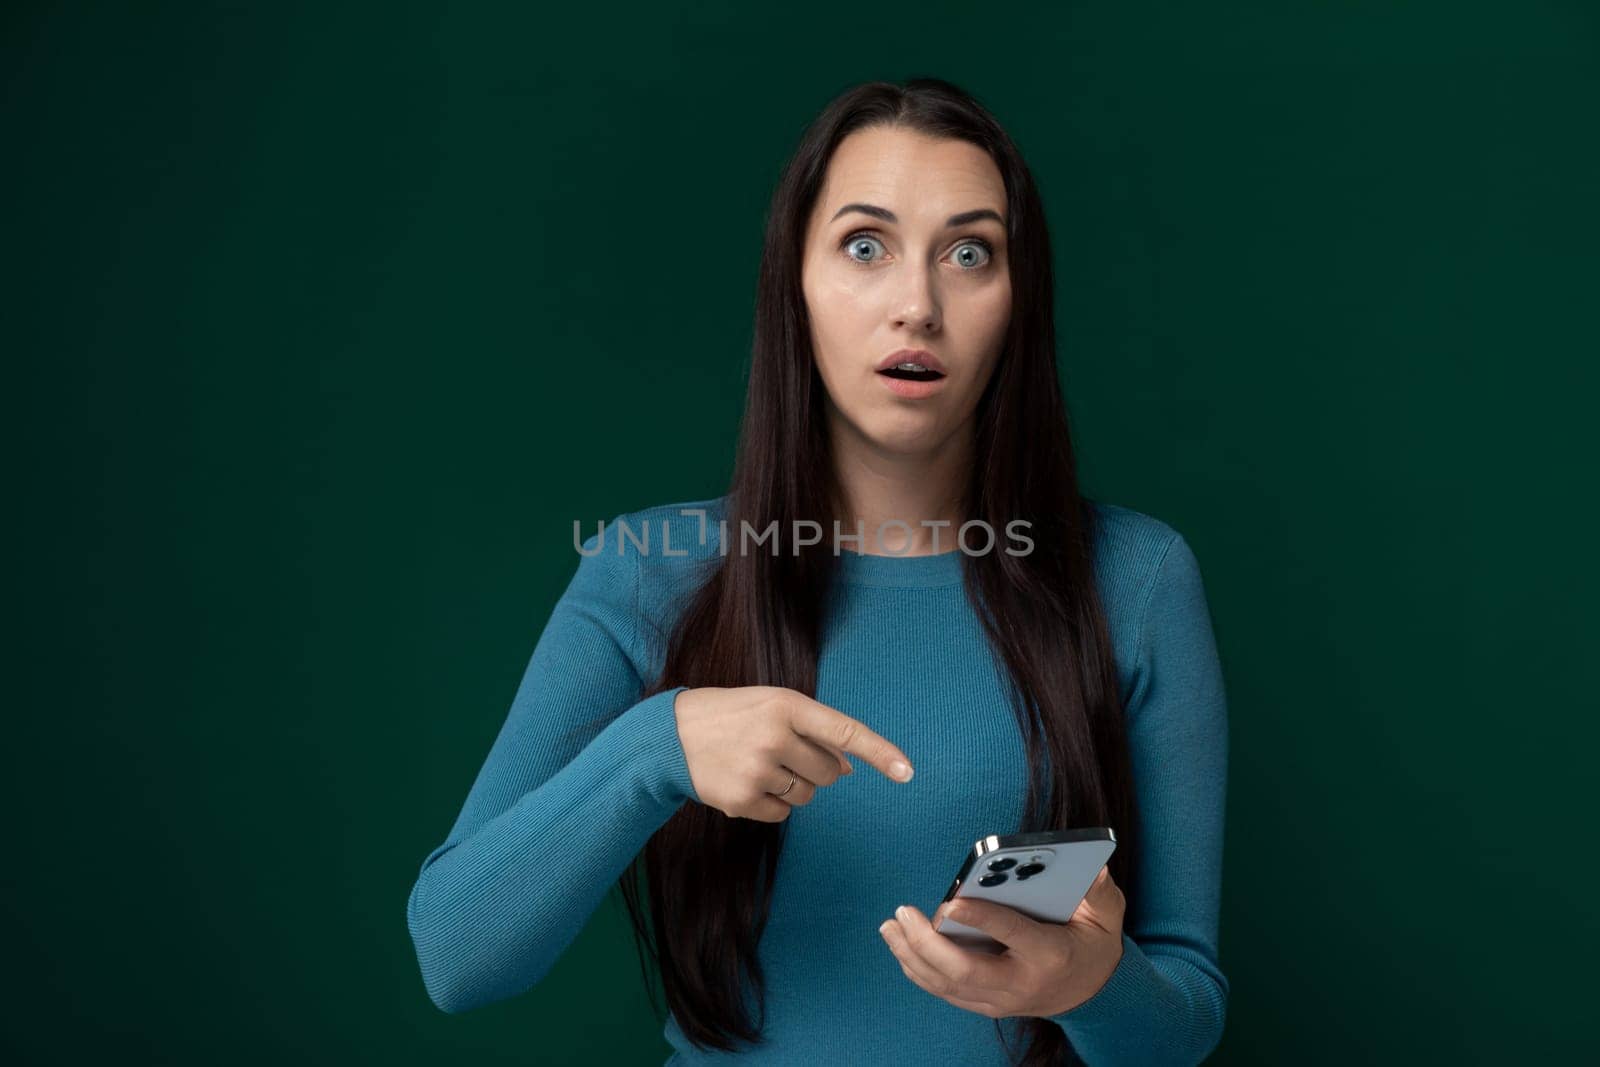 A woman is pointing at a cell phone with a surprised look on her face. She appears to be reacting to what she sees on the screen, showing astonishment or disbelief.